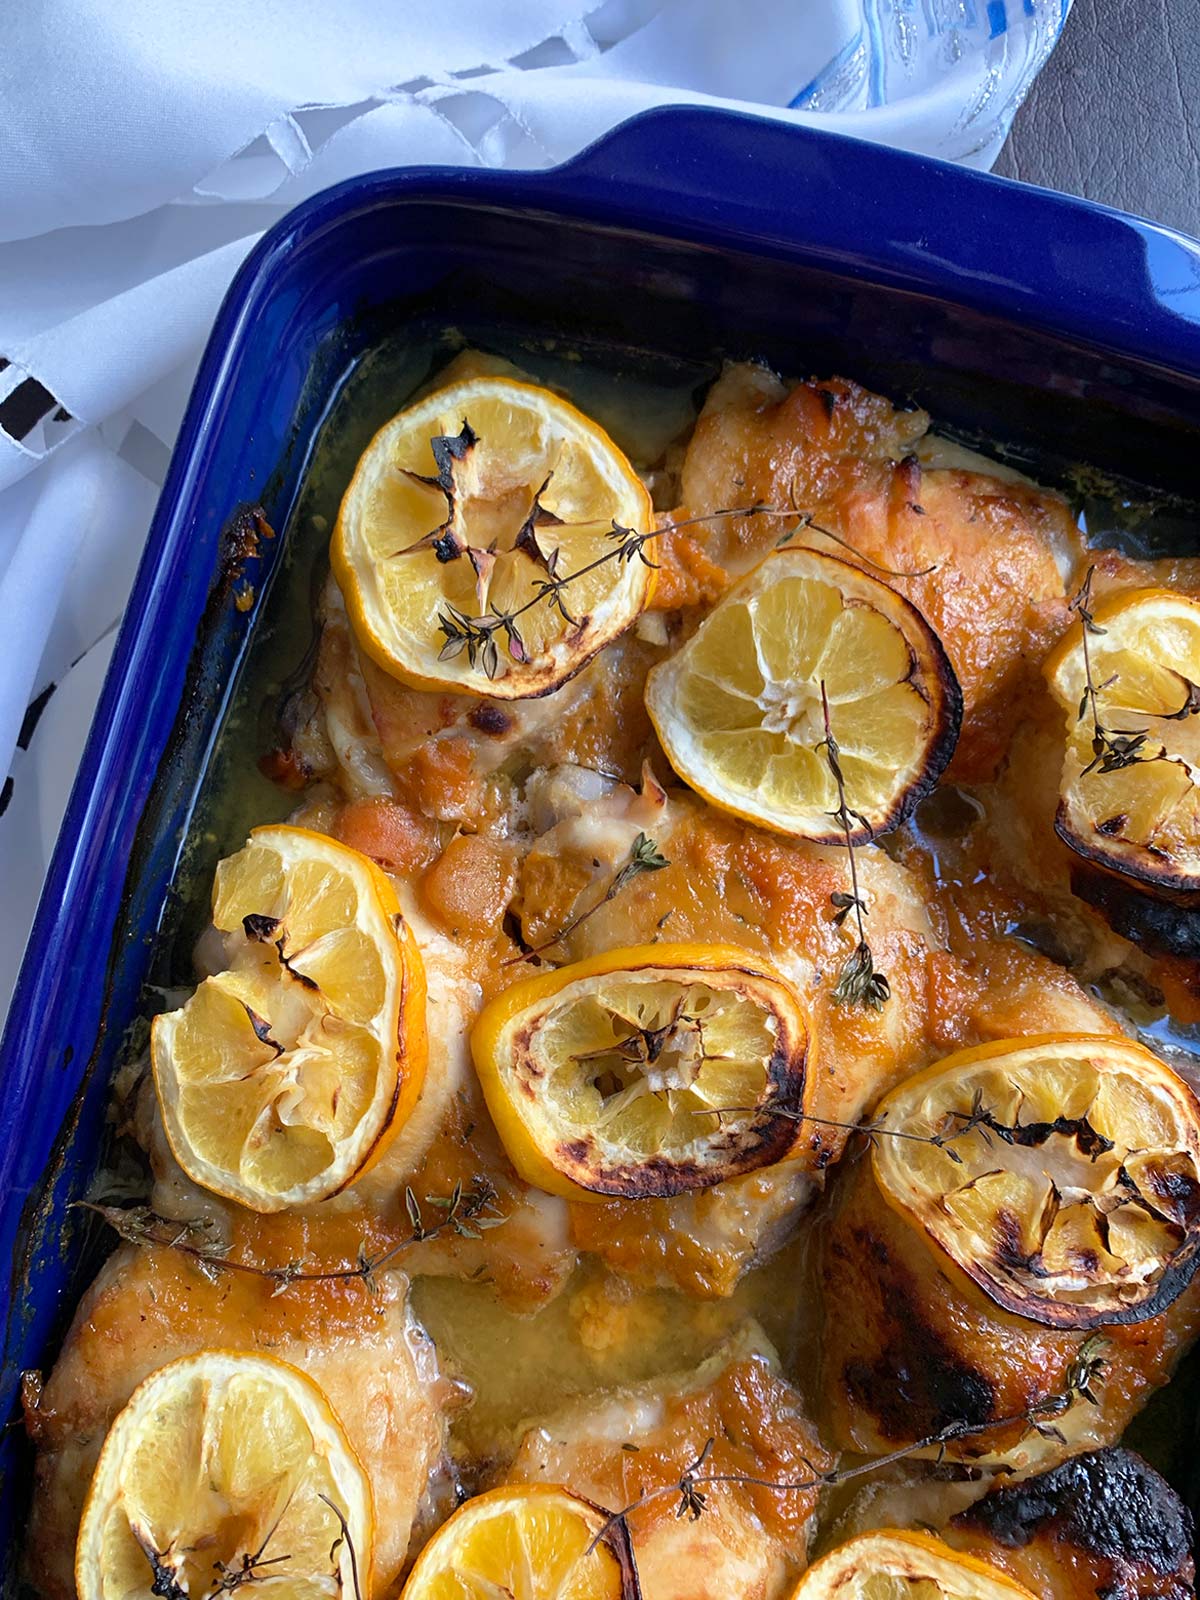 Baked chicken with apricot jam - one of my favorite Hanukkah chicken recipes